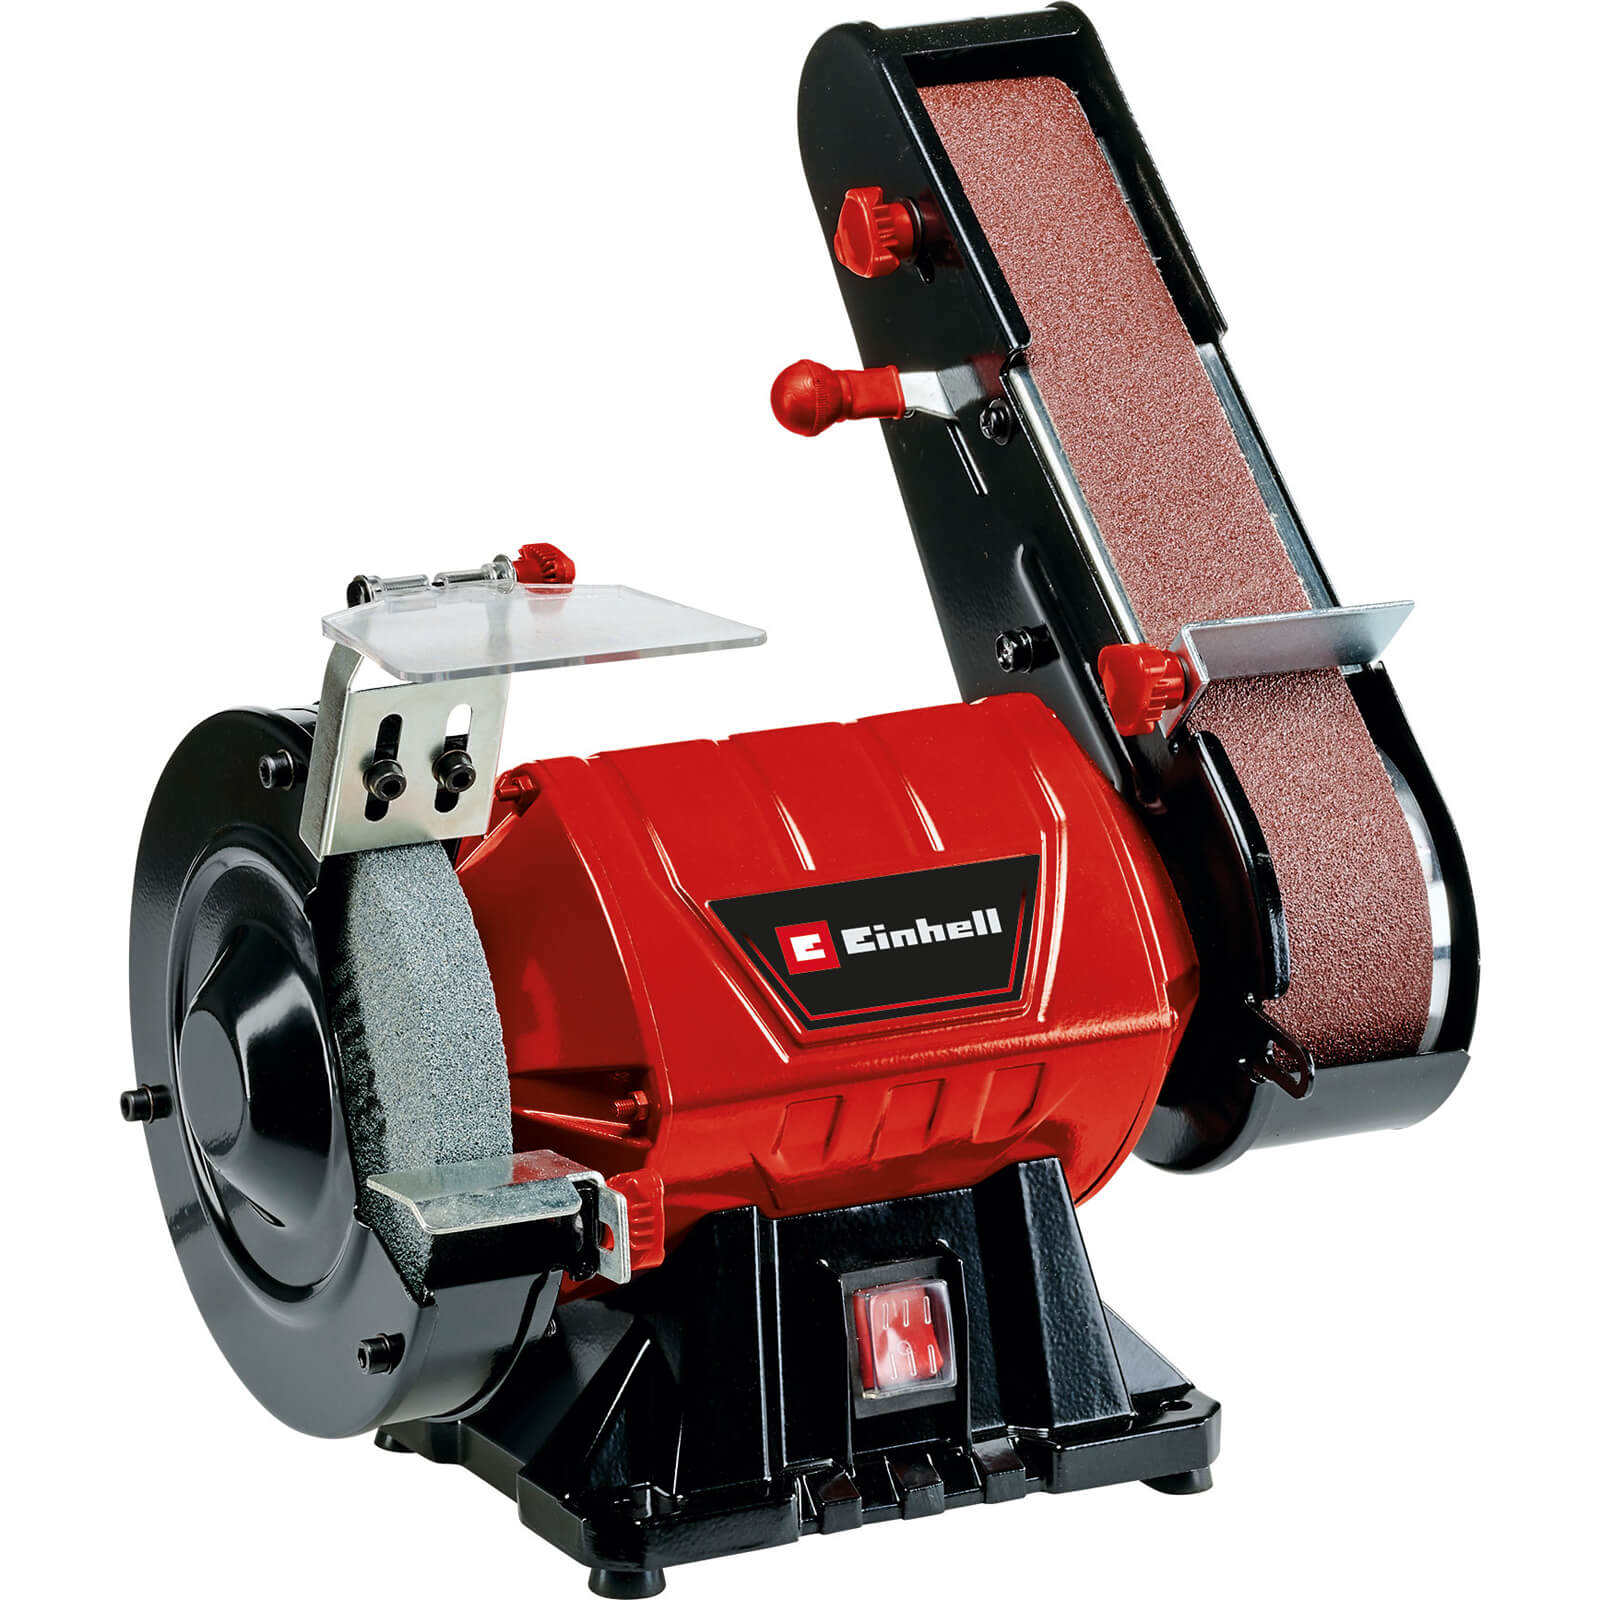 Photo of Einhell Tc-us 350 Belt Sand And Disc Grinder